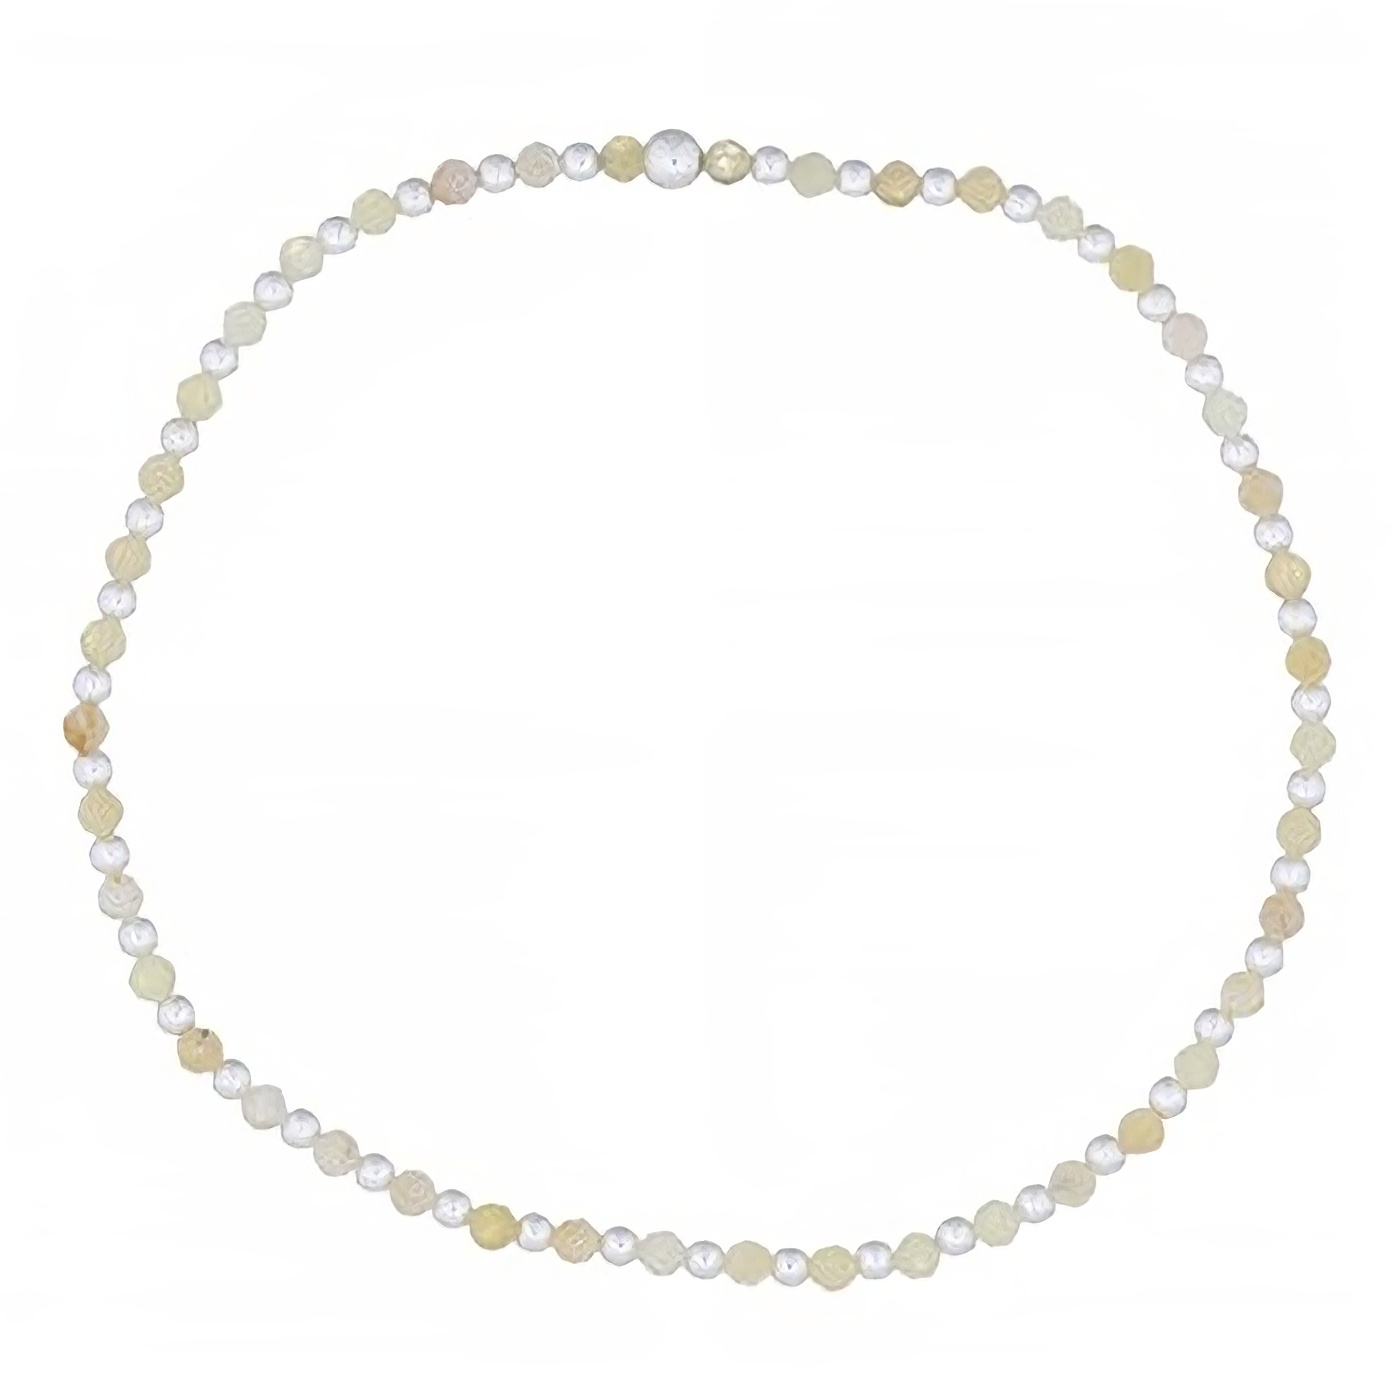 Stretchable Yellow Opal With 925 Silver Round Beads Bracelet by BeYindi 